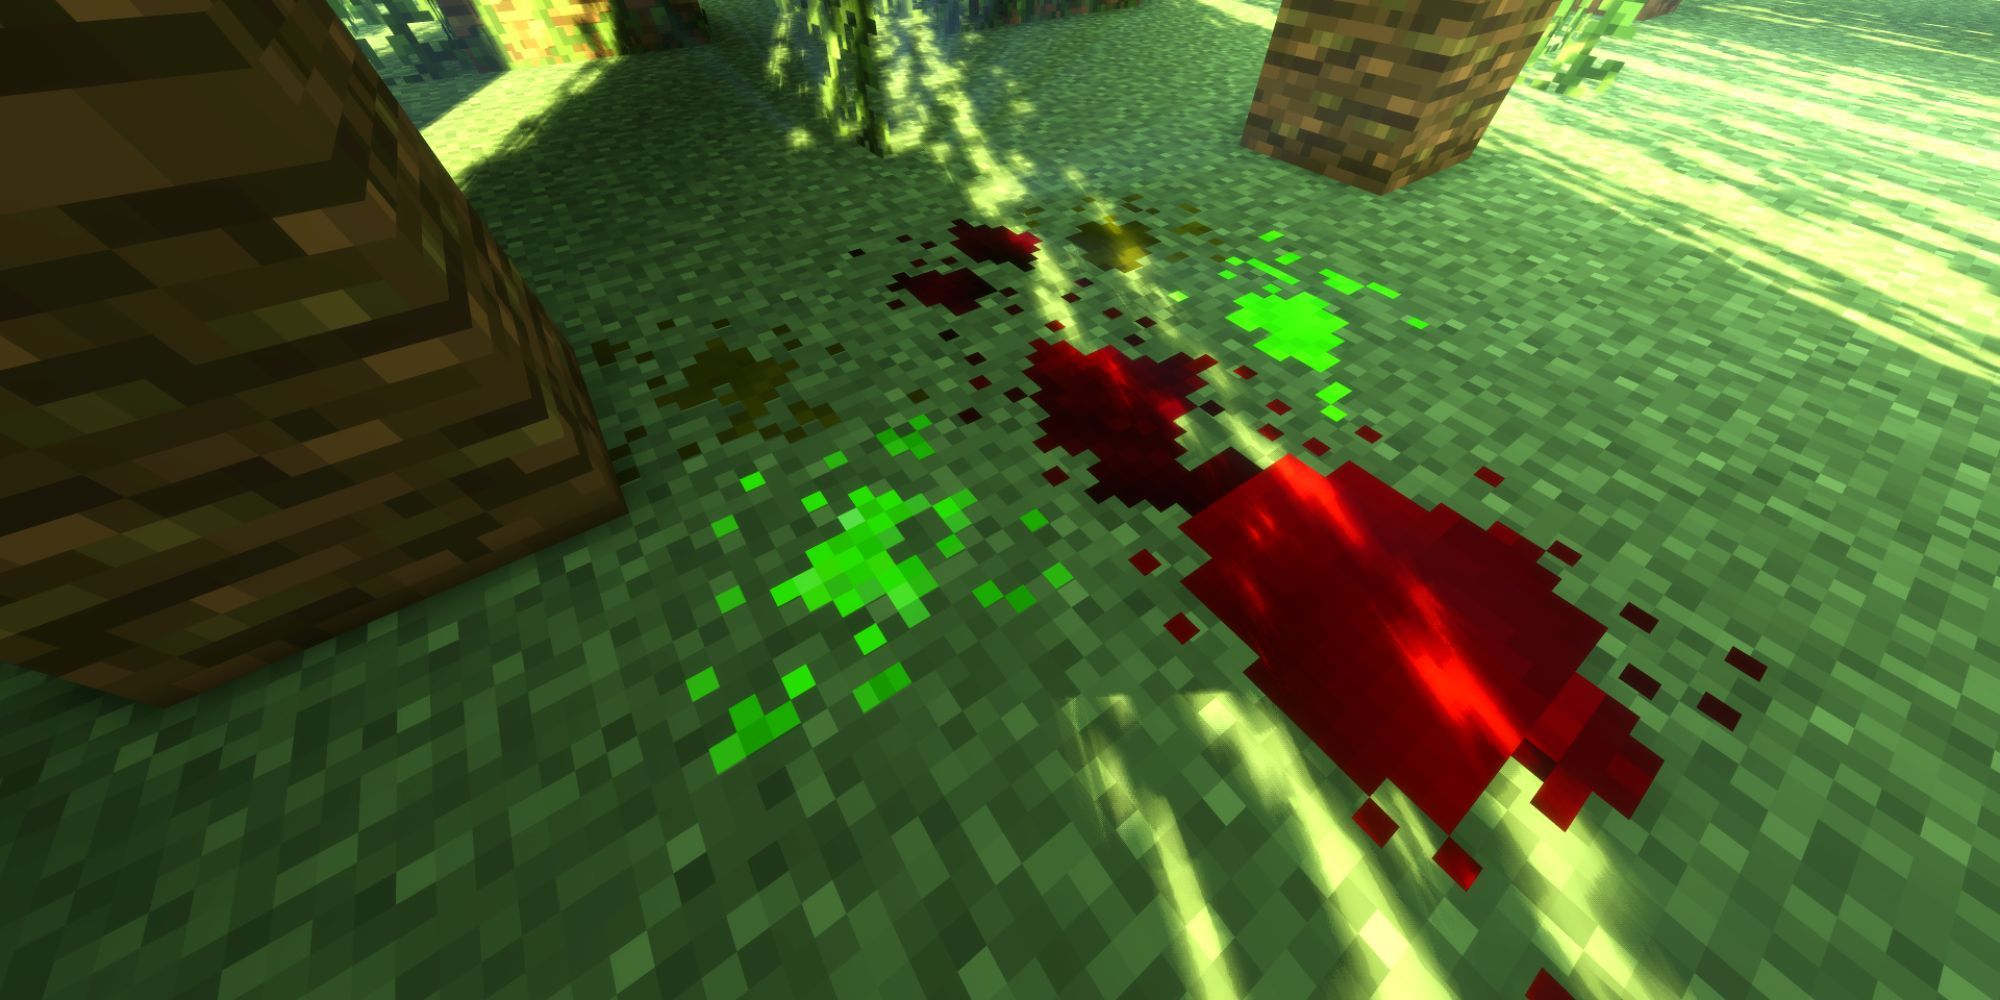 Multiple, messy pools of blood and bright green liquids on a grassy, forest floor.